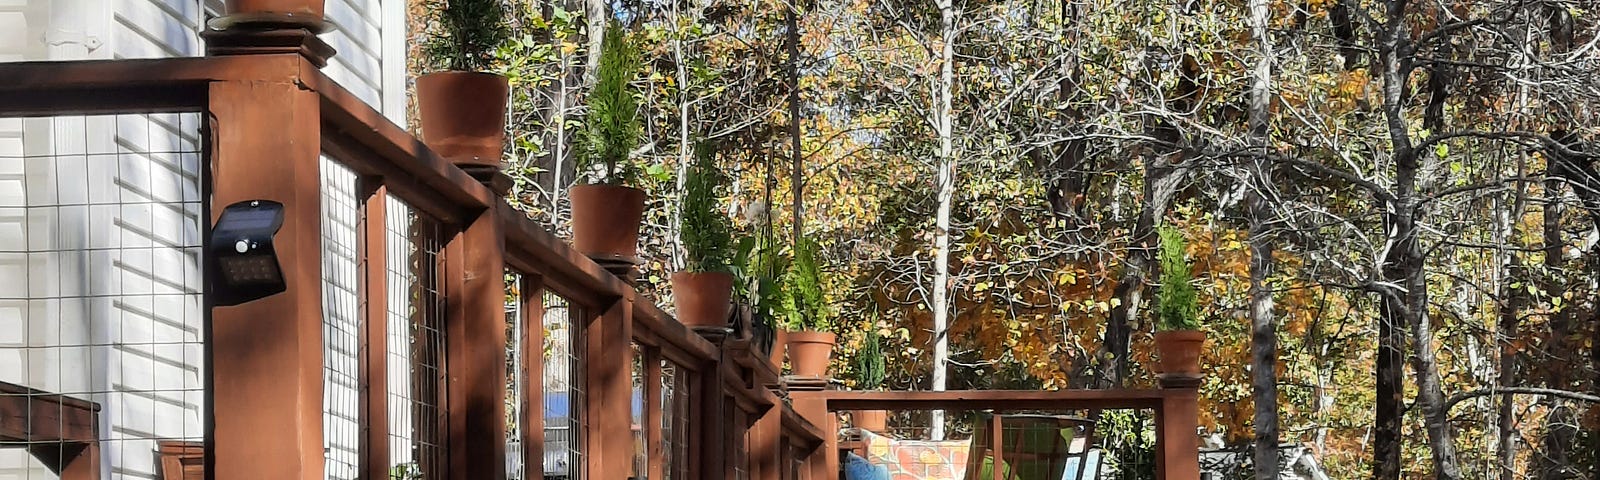 photo of deck with small arborvitae trees on posts